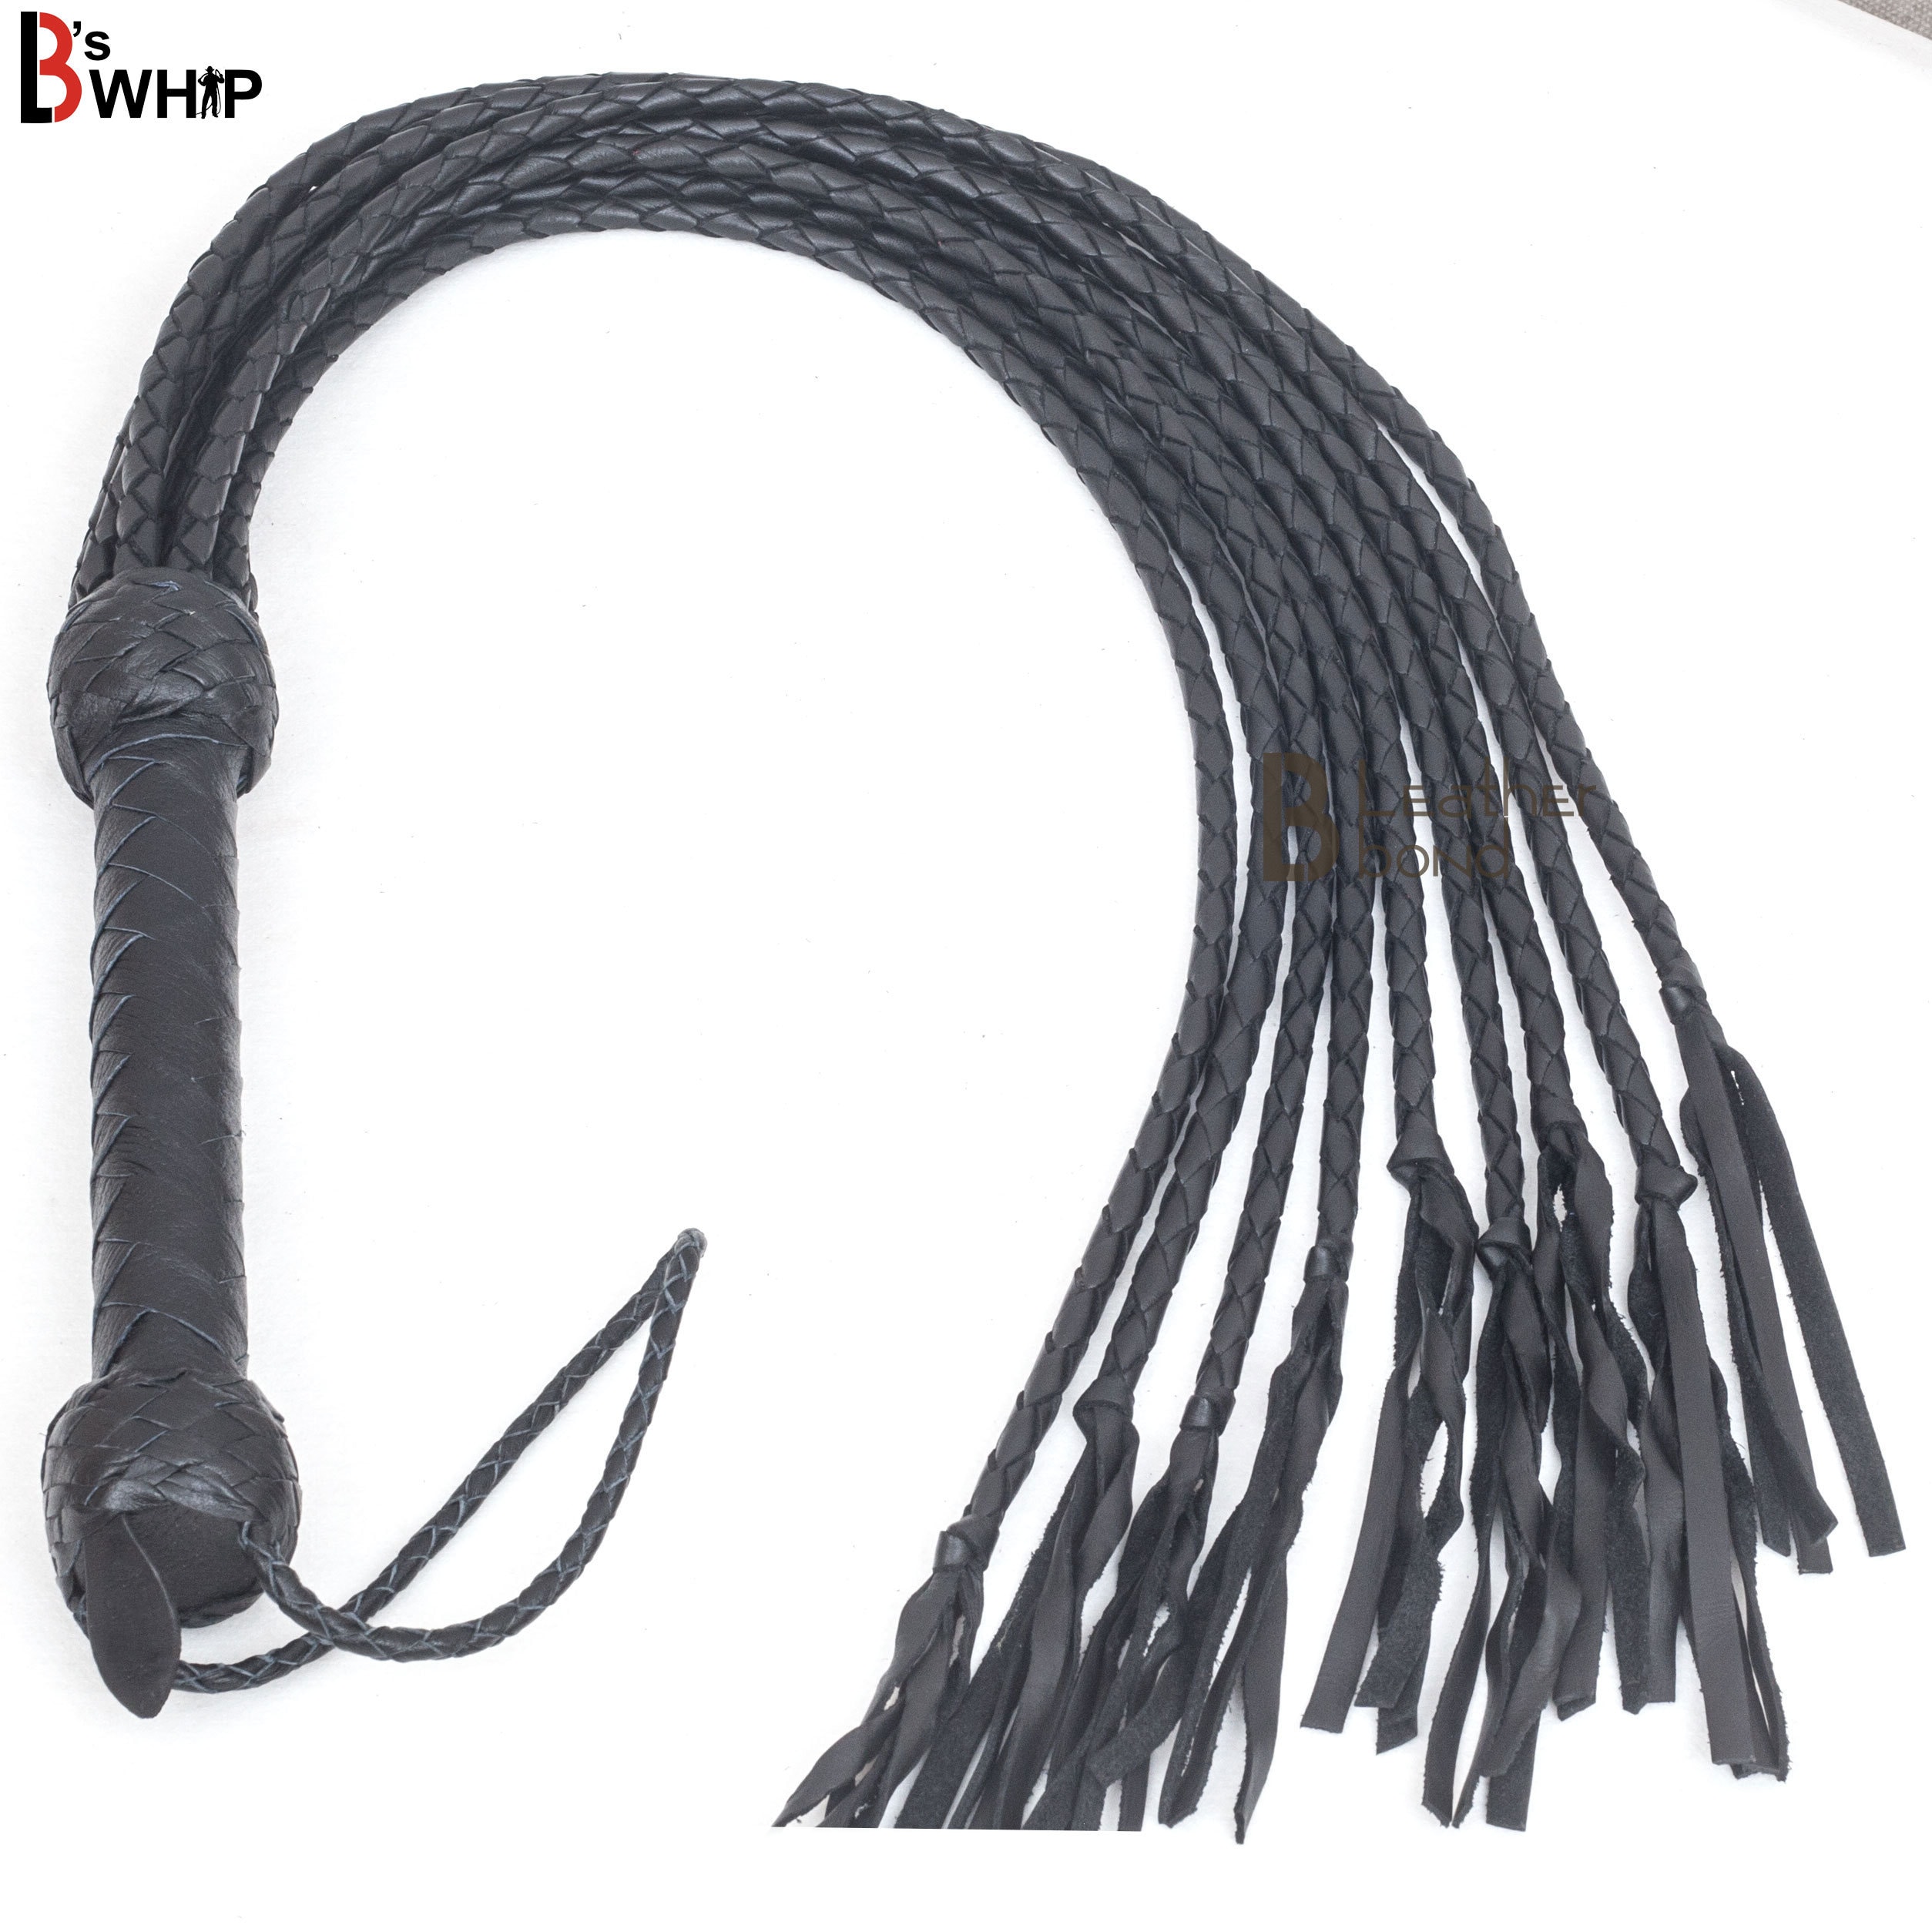 1x Genuine Real cow Leather Whip cowhide Flogger Handle Tassels four colors 